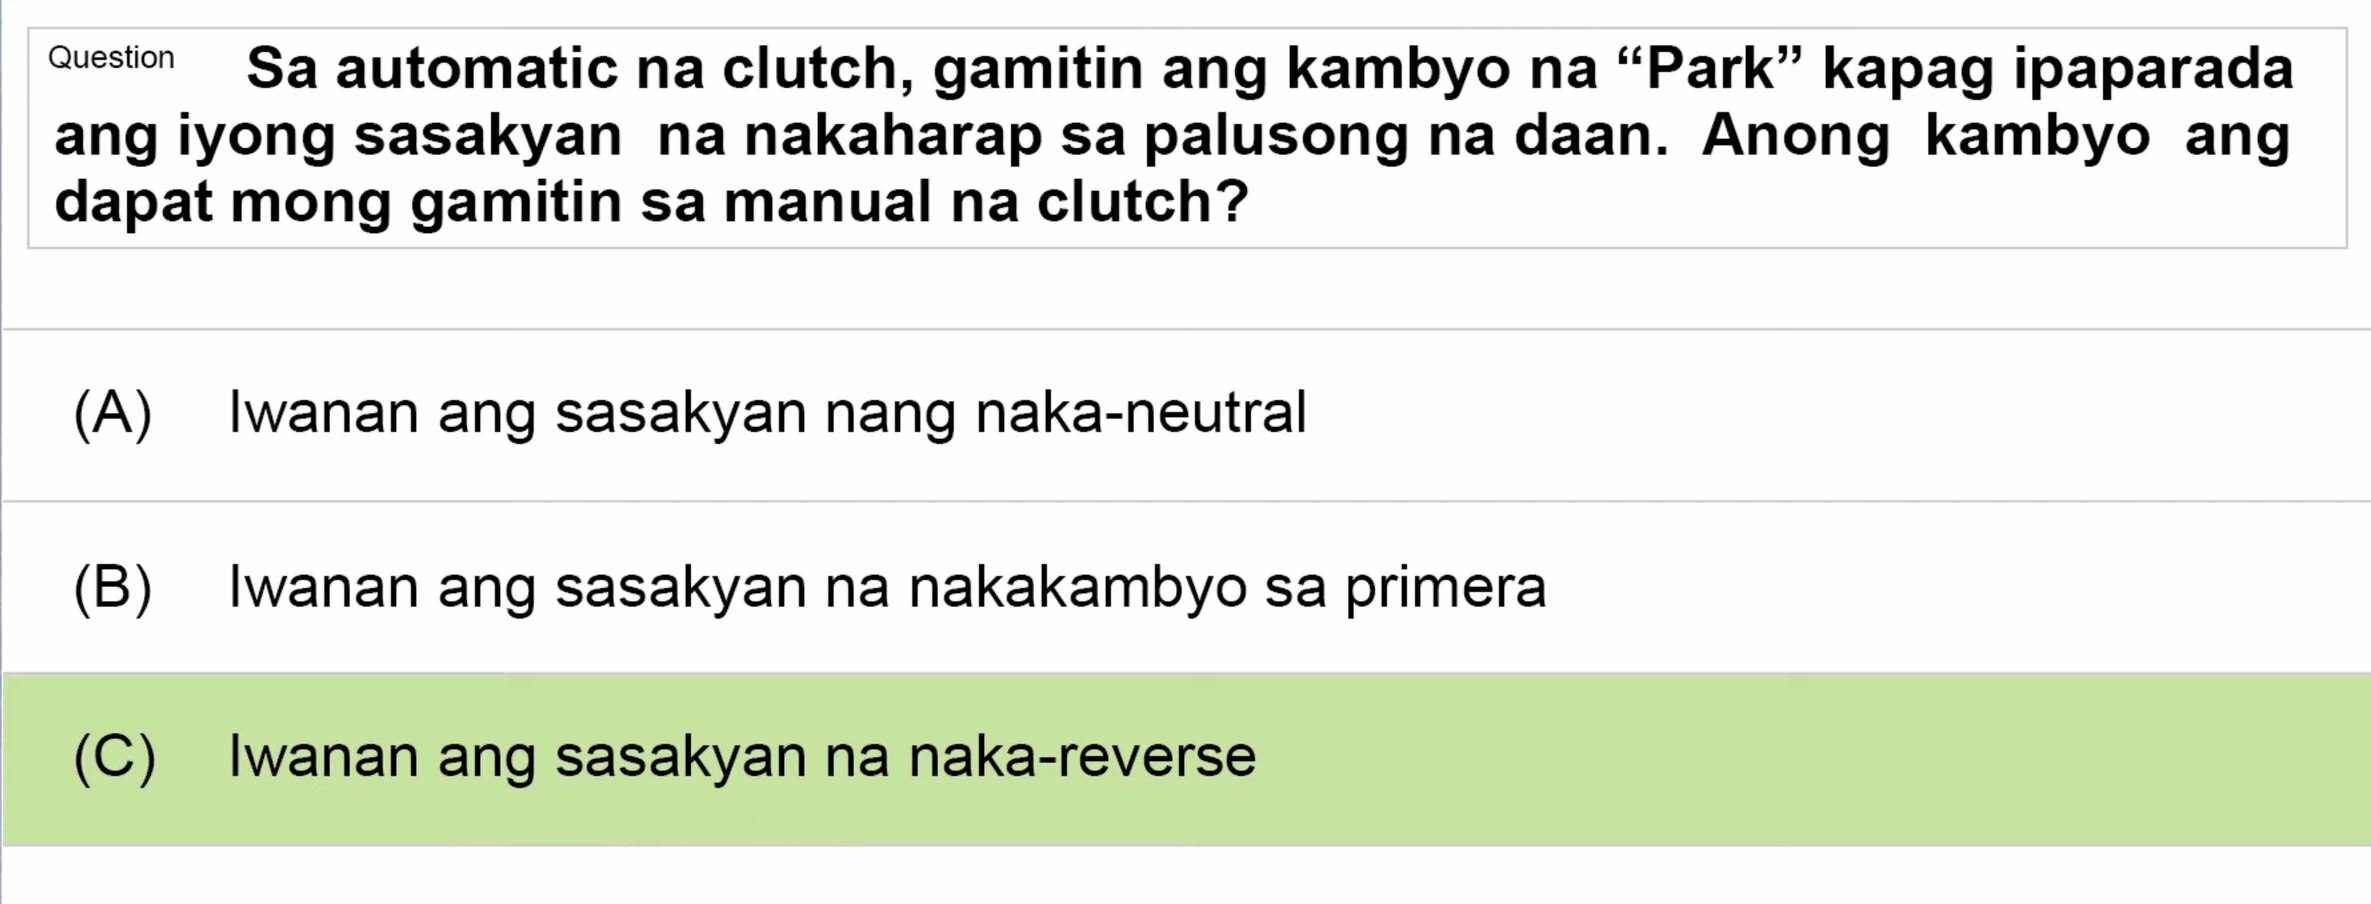 LTO Tagalog non professional exam reviewer light vehicle 3 (27)